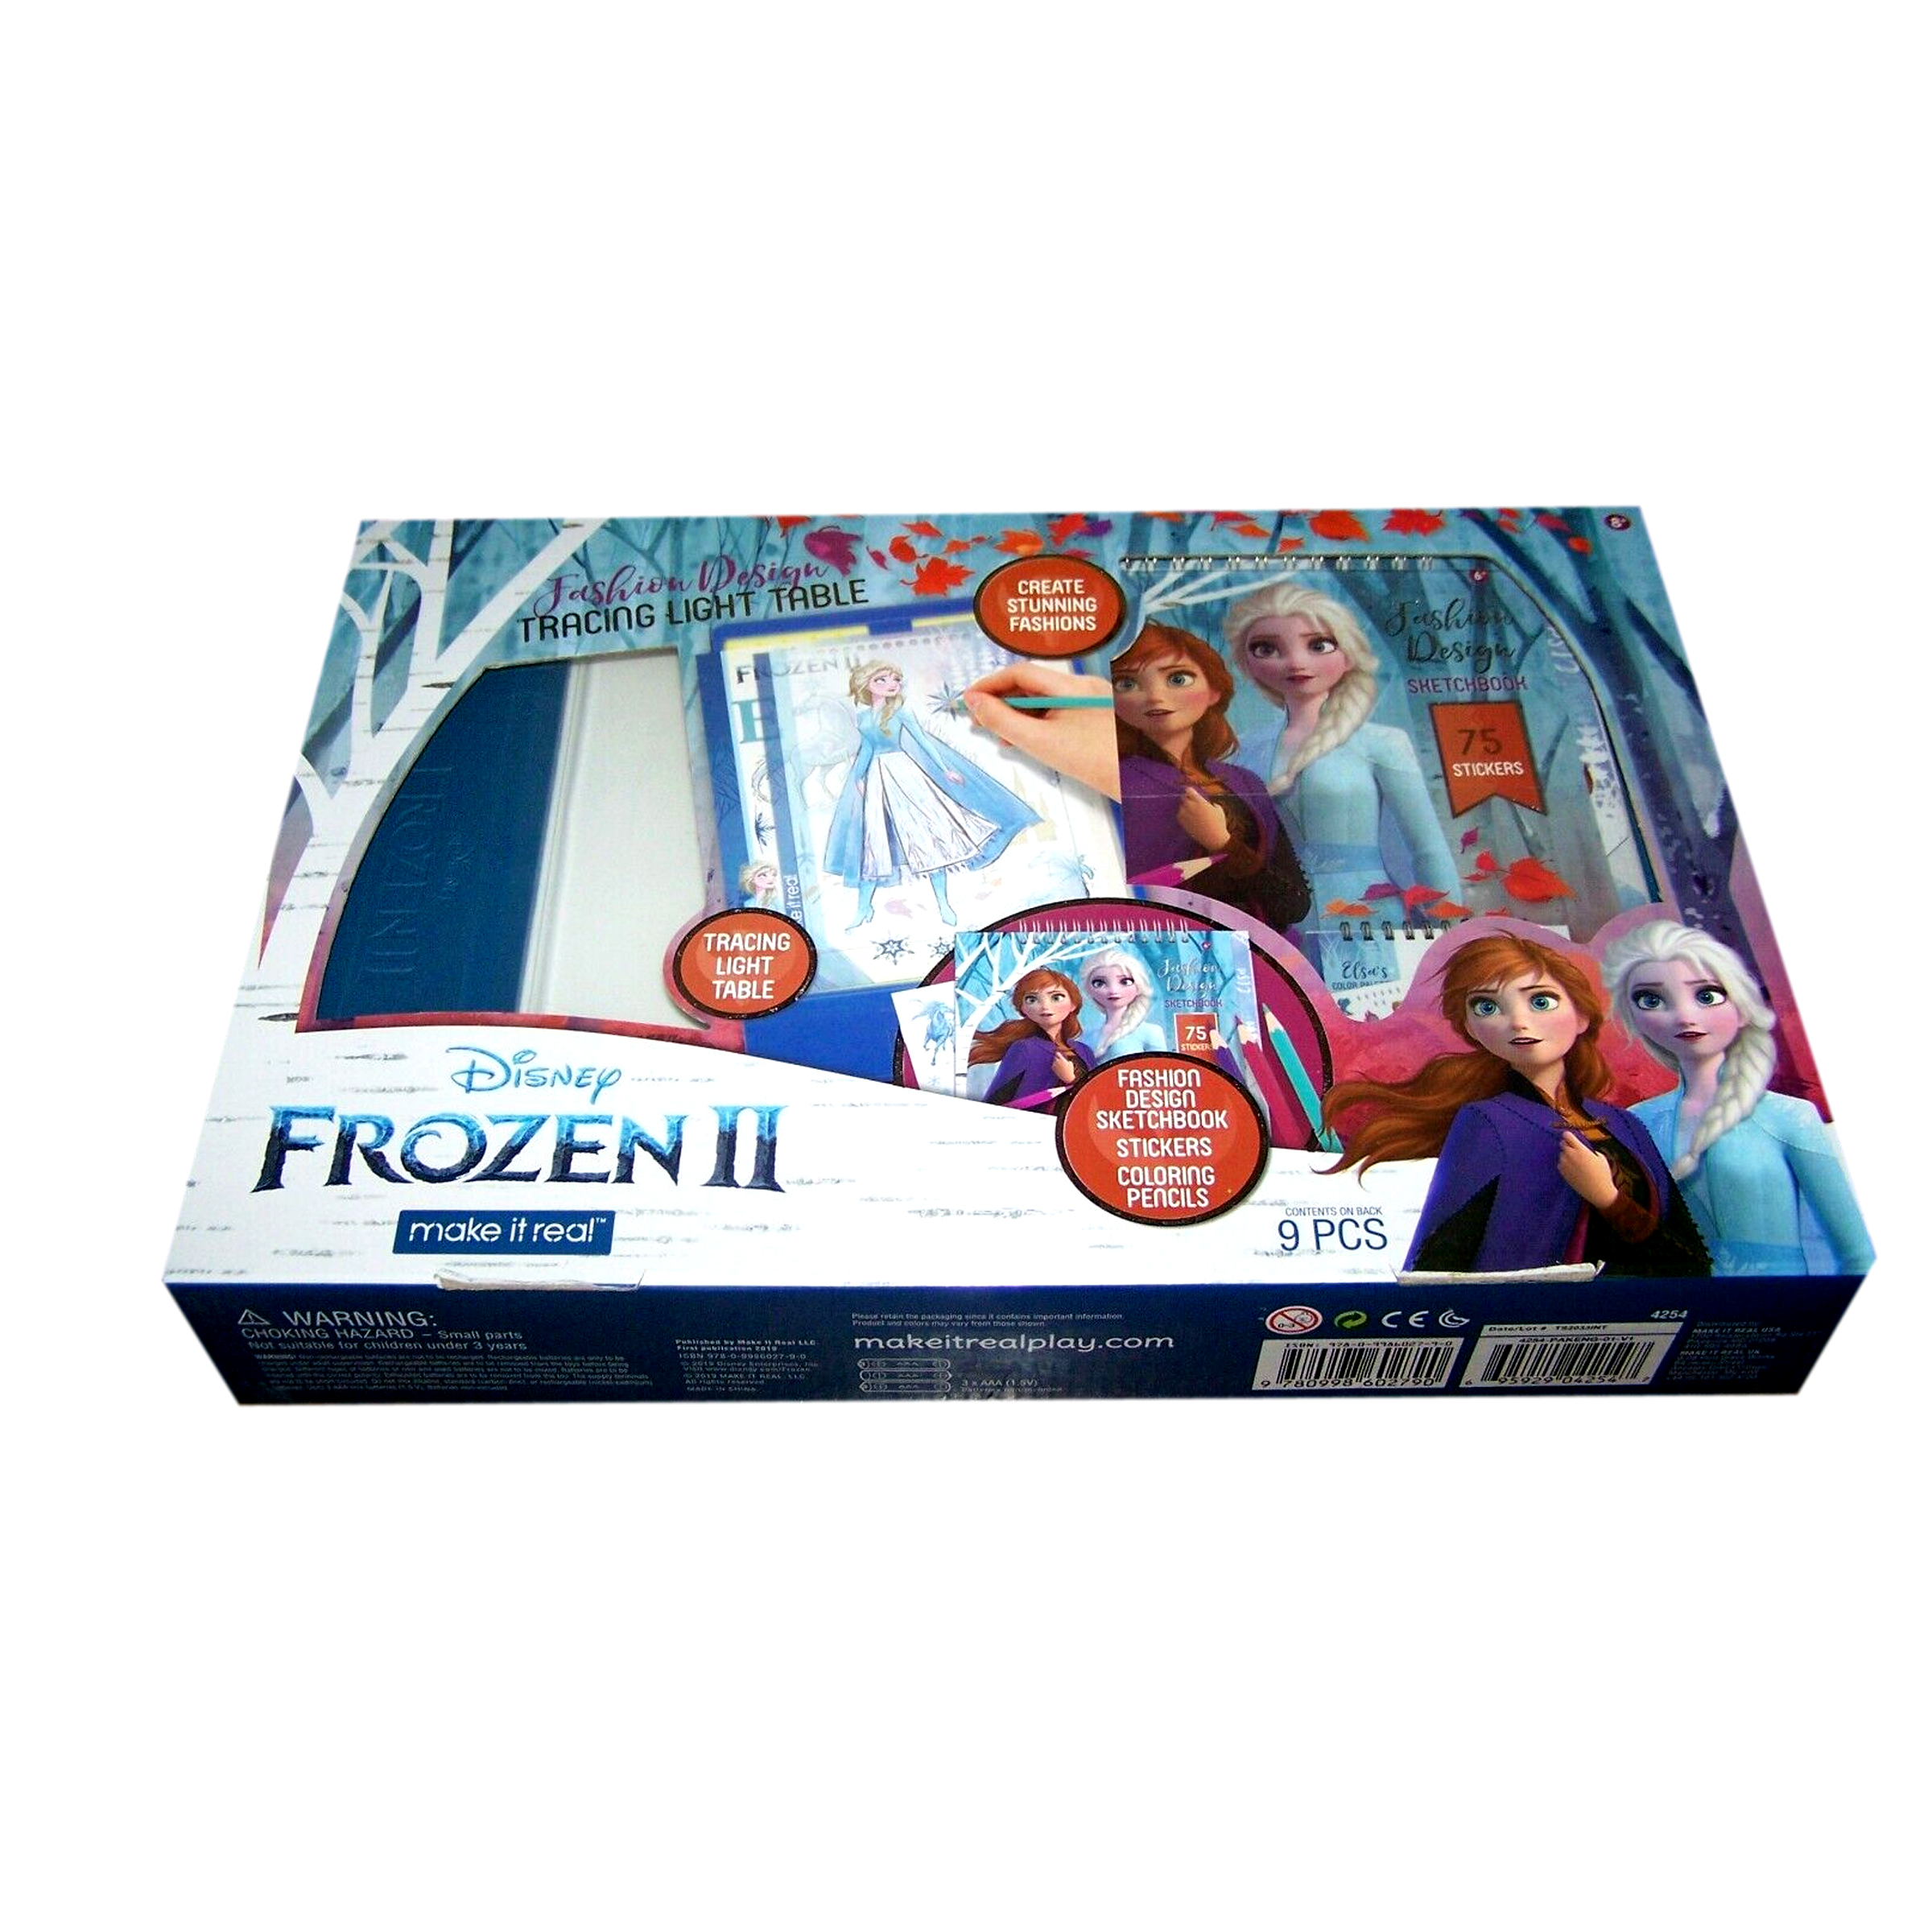 Disney – Frozen 2 – Make it Real – Fashion Design Tracing Light Table -Brand New